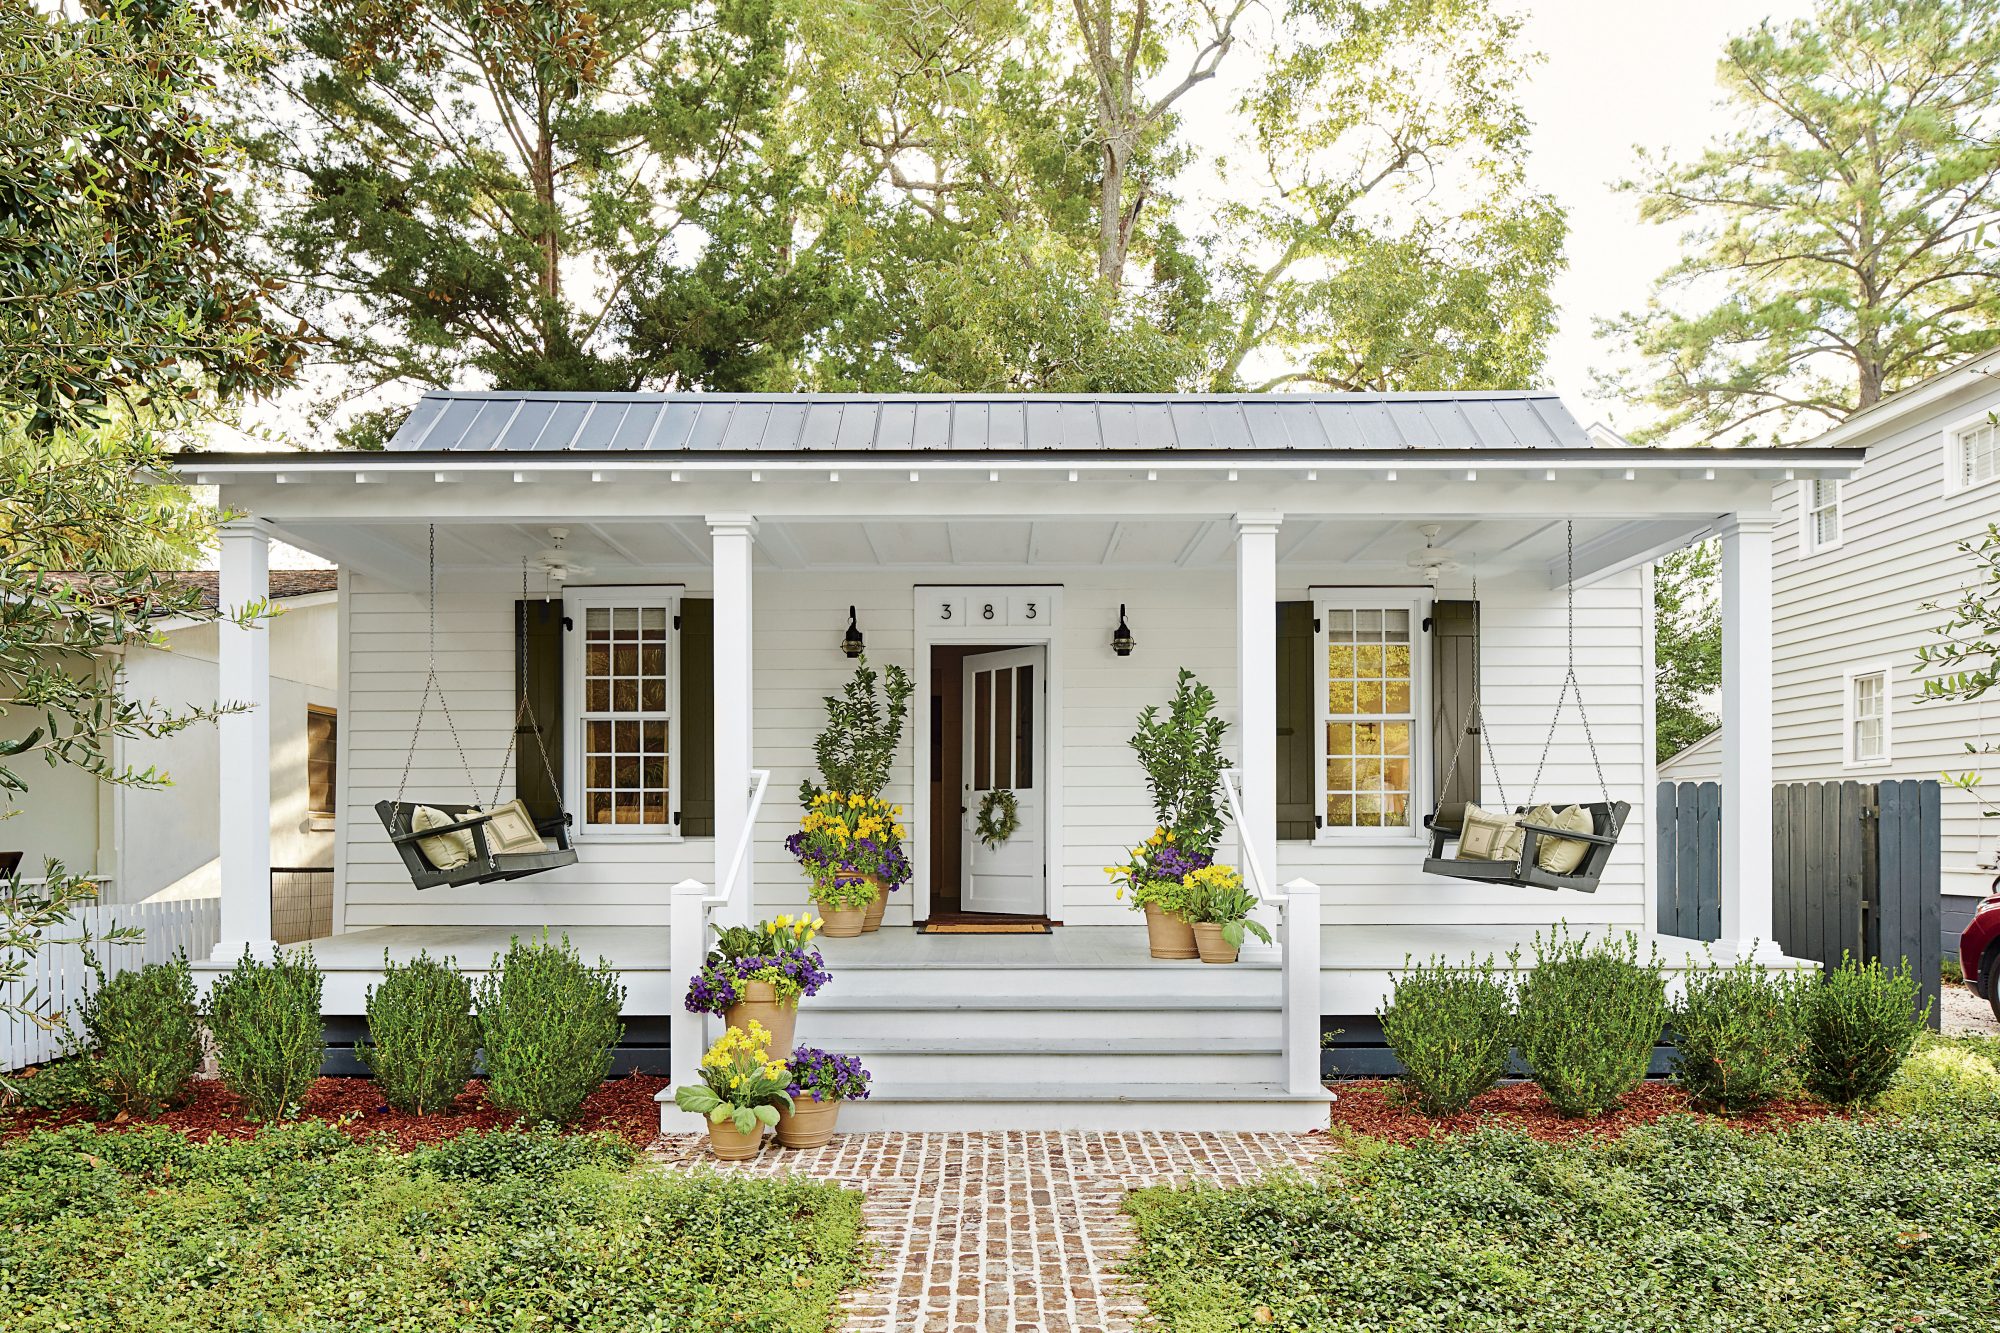 Designing The Perfect Porch: Tips and Tricks from the Pros